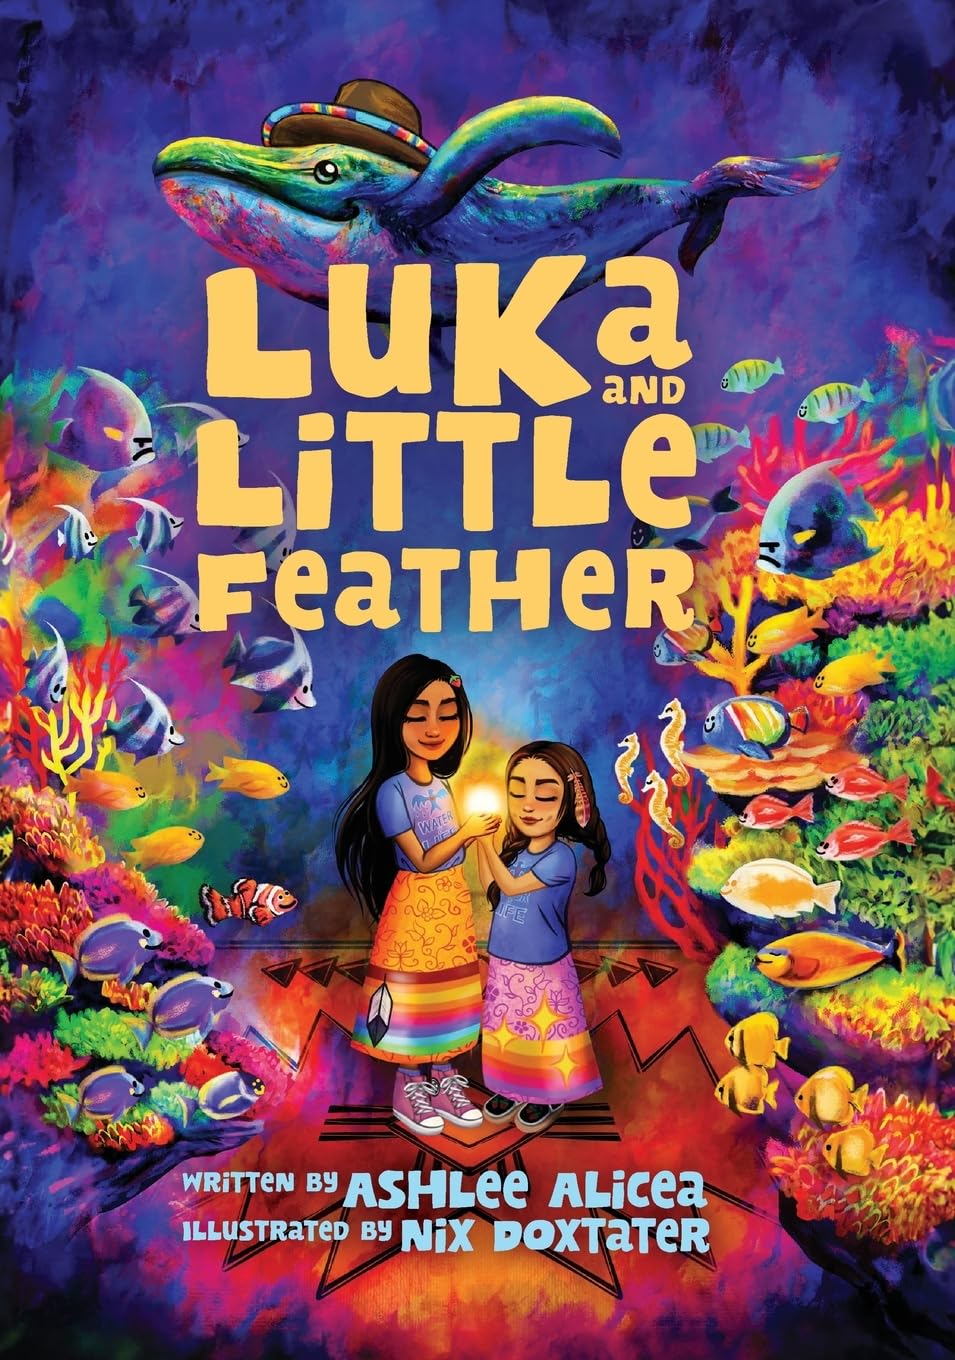 Luka and Little Feather by Ashlee Alicea, illustrated by Nix Doxtater